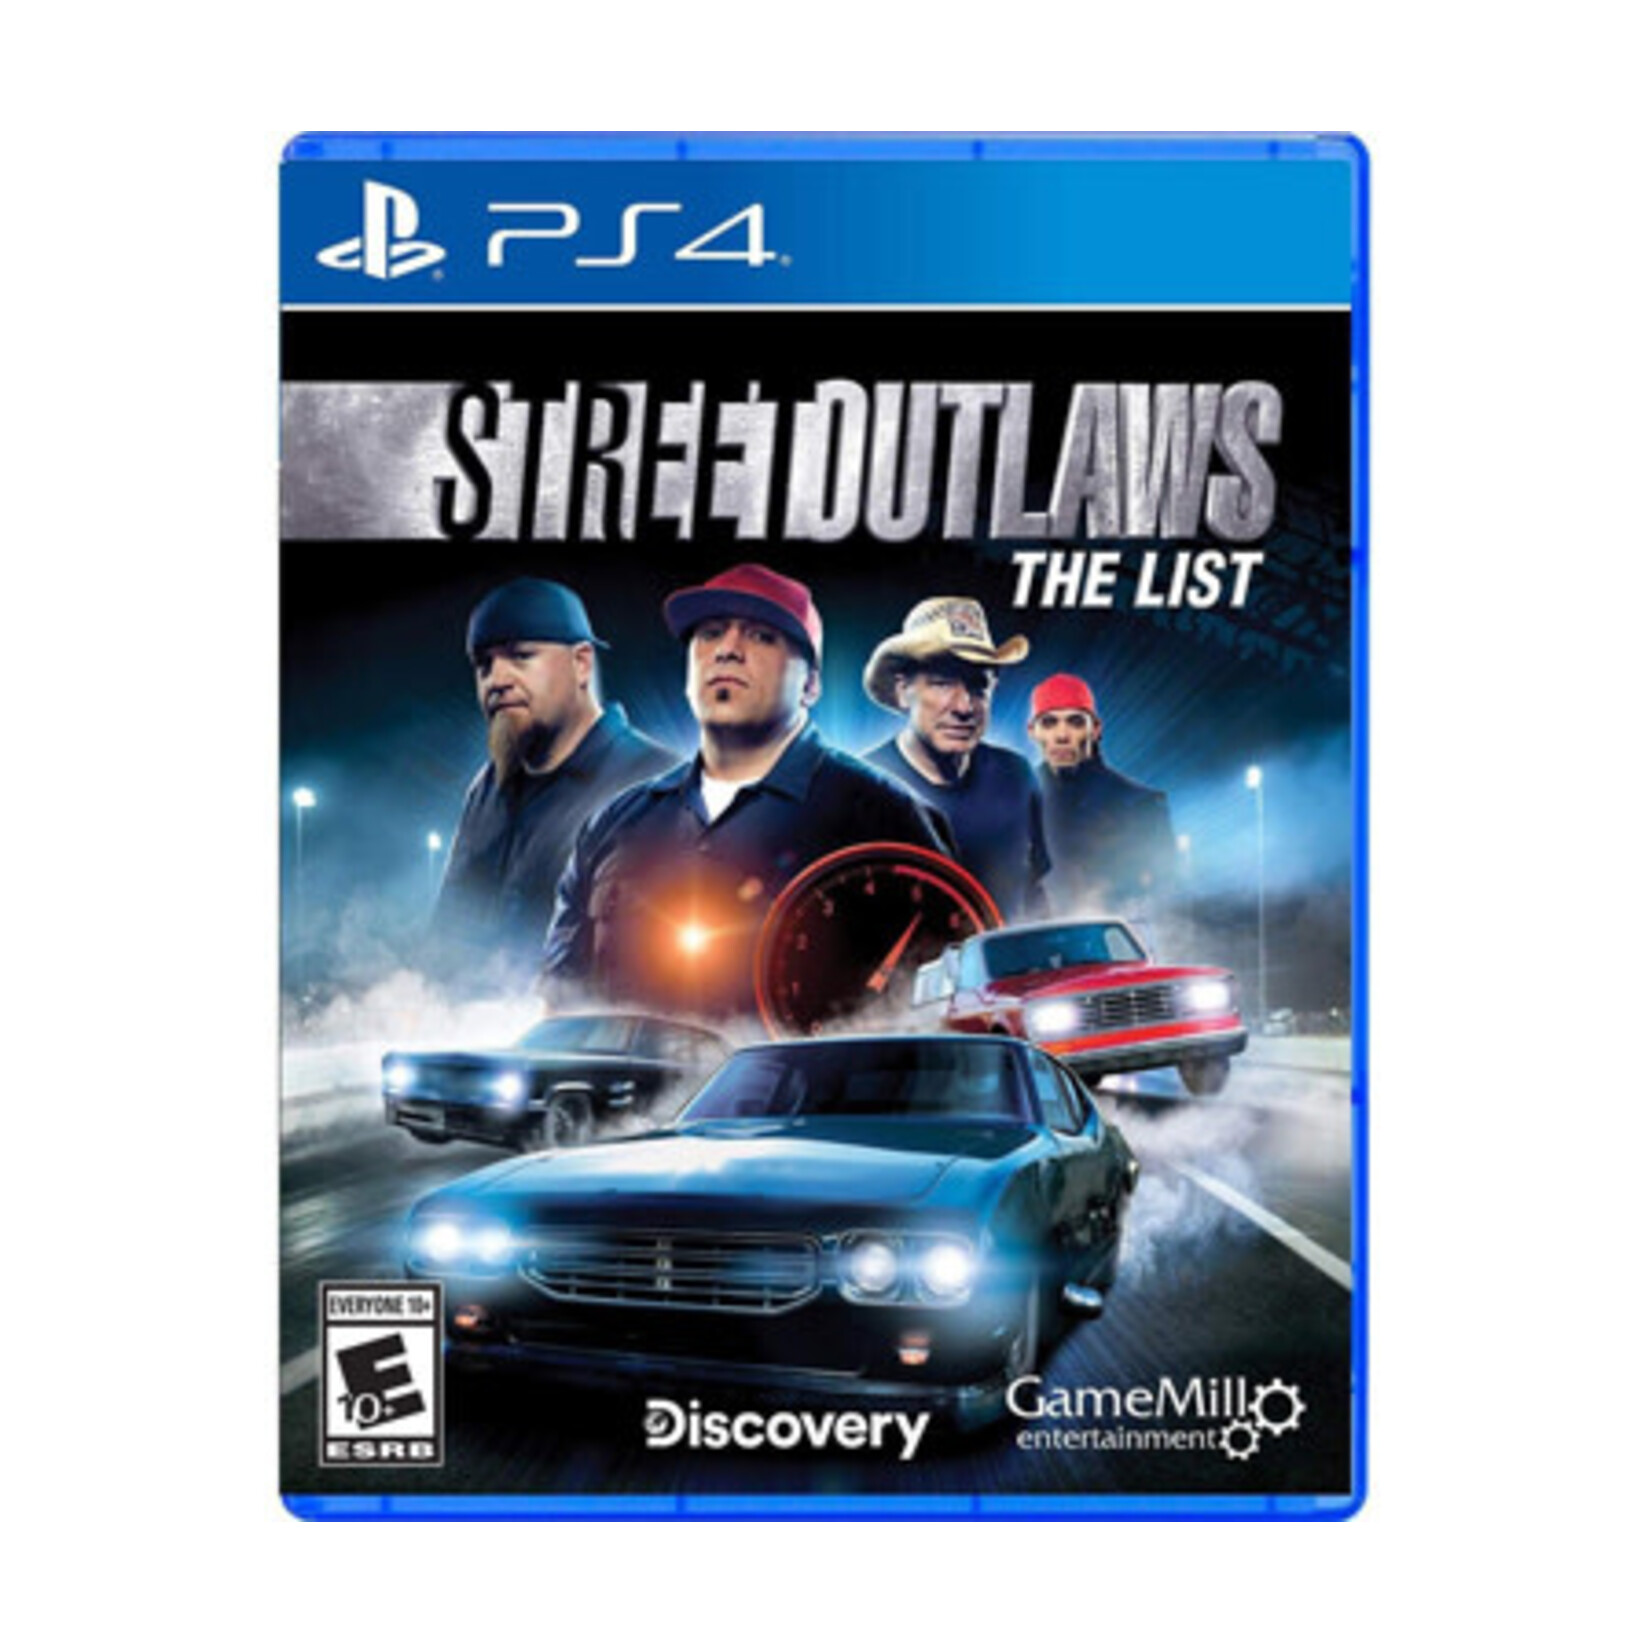 PS4U-STREET OUTLAWS: THE LIST